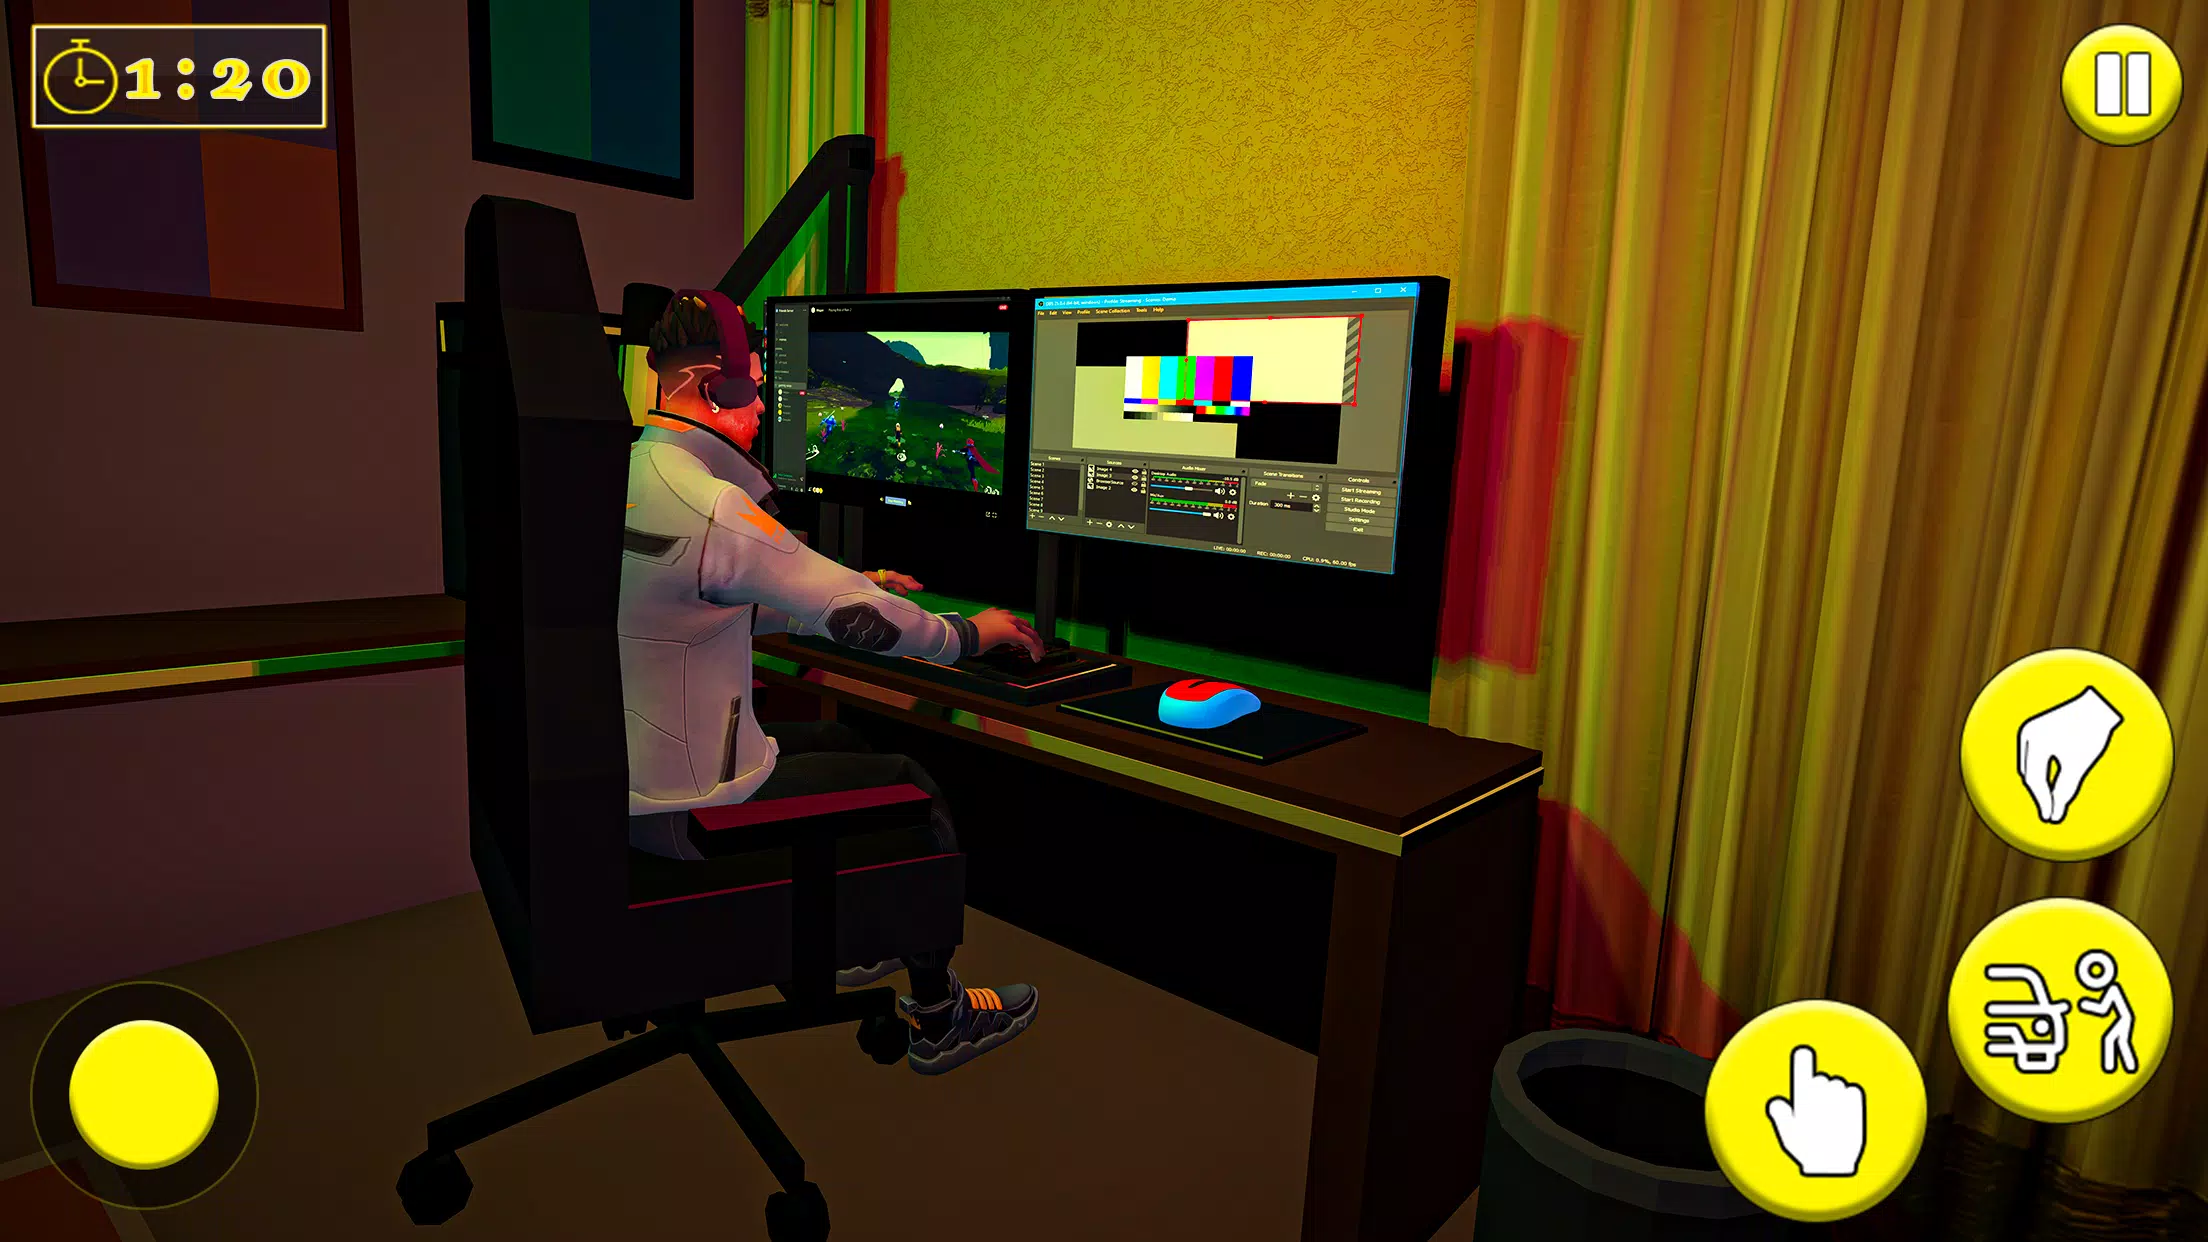 streamer life simulator Hints APK for Android Download